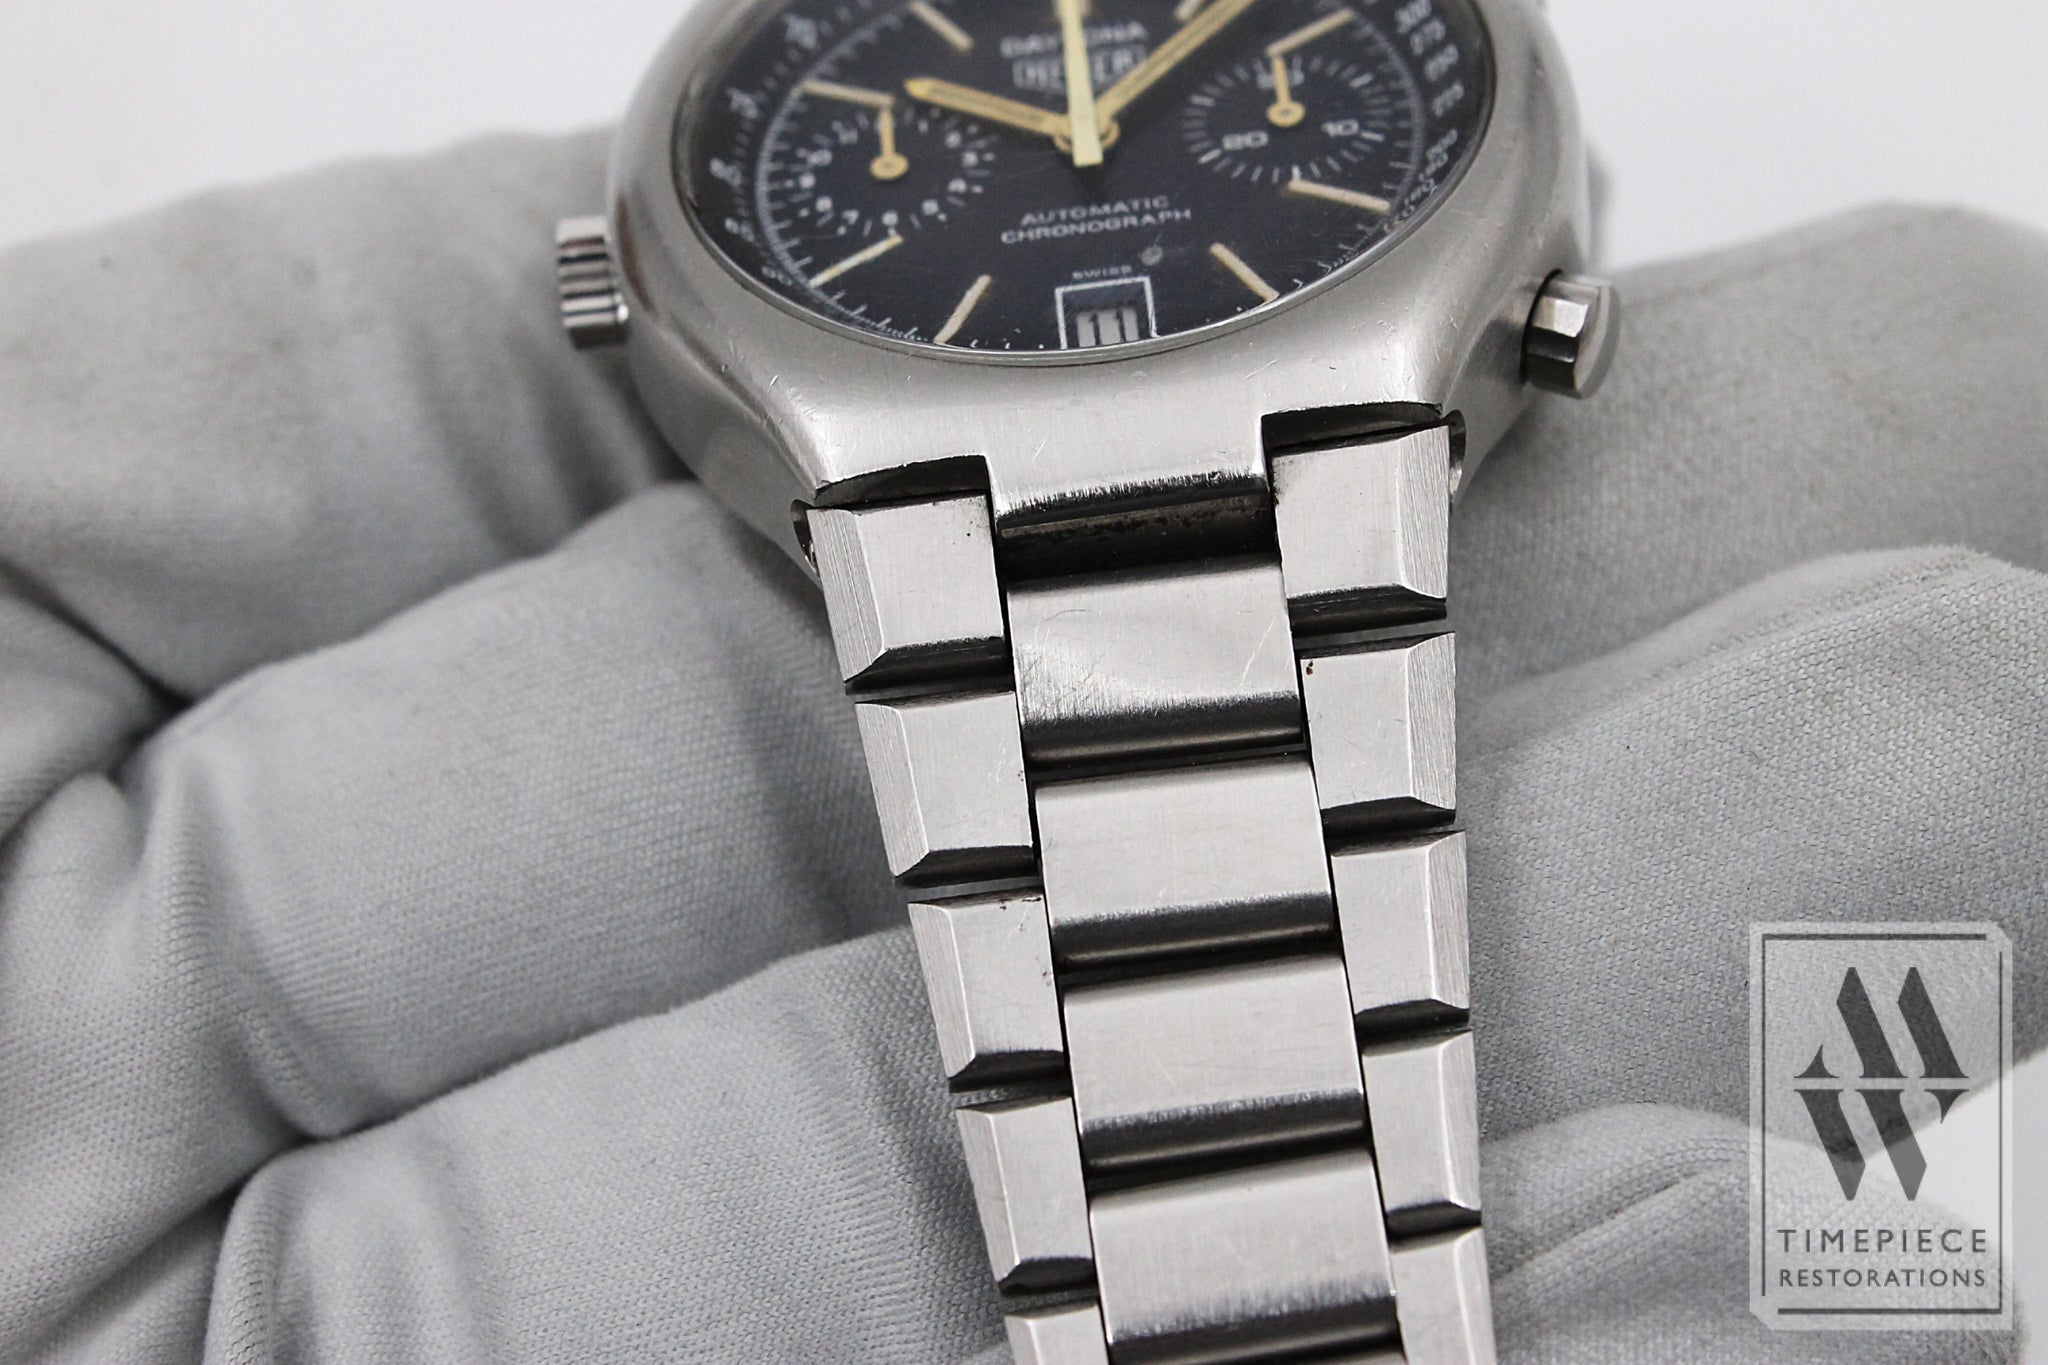 Heuer Daytona Vintage Chronograph Wristwatch - Cal. 12 With Stainless Steel Case Freshly Serviced